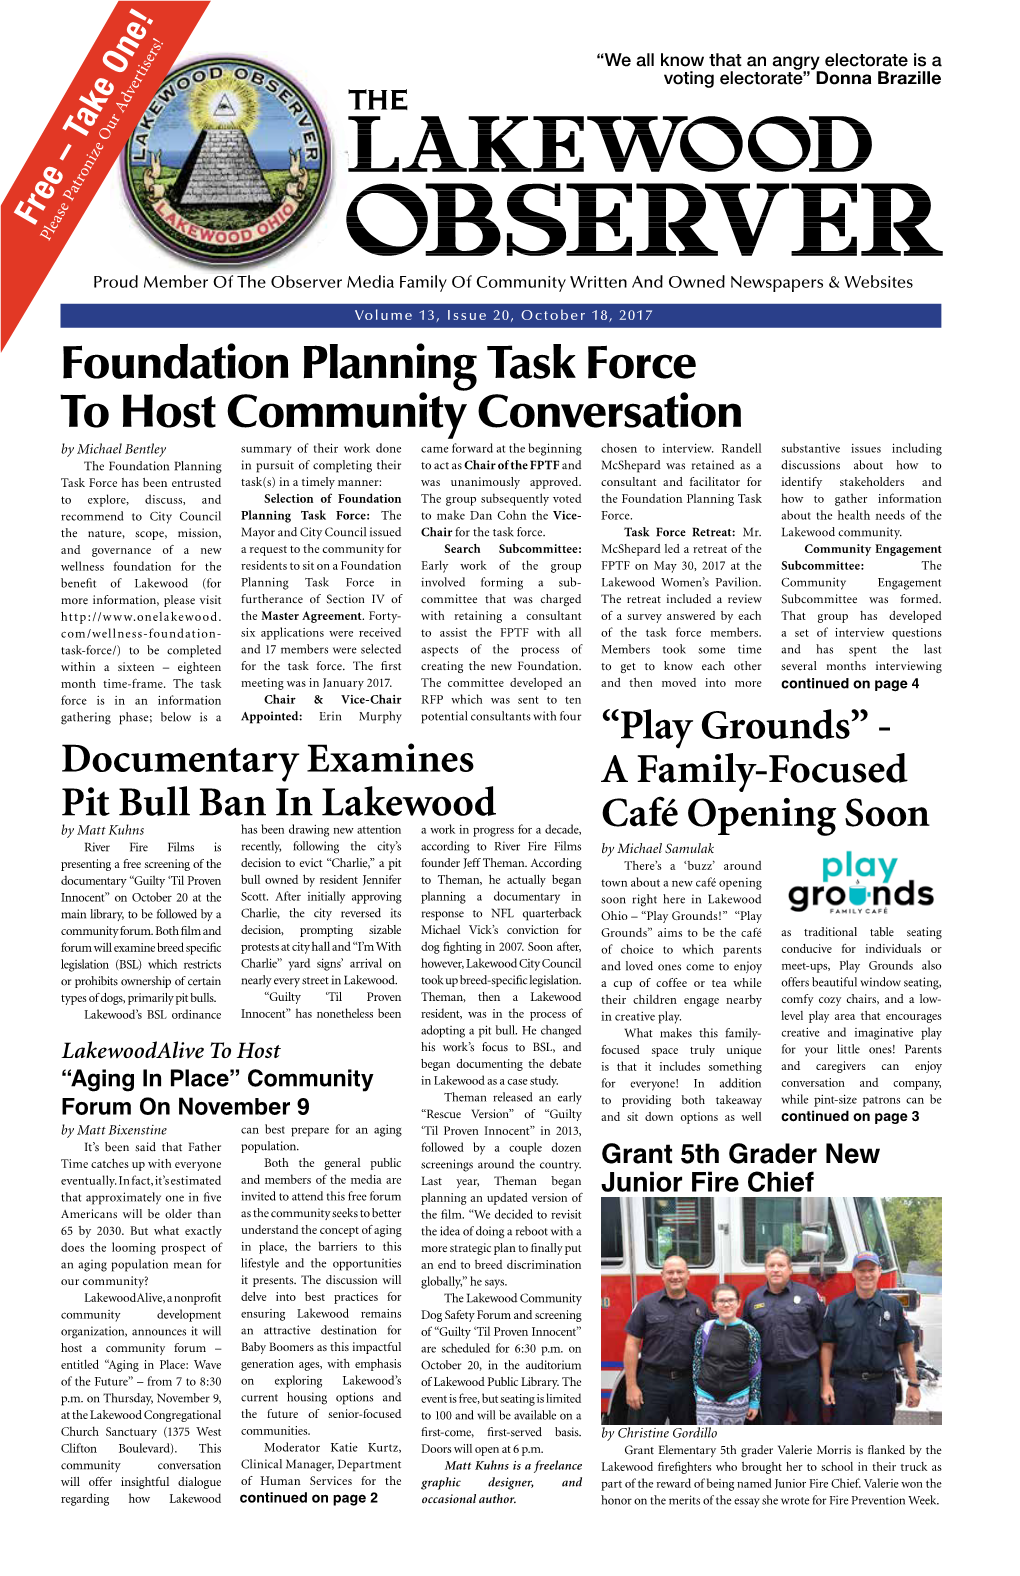 Foundation Planning Task Force to Host Community Conversation by Michael Bentley Summary of Their Work Done Came Forward at the Beginning Chosen to Interview